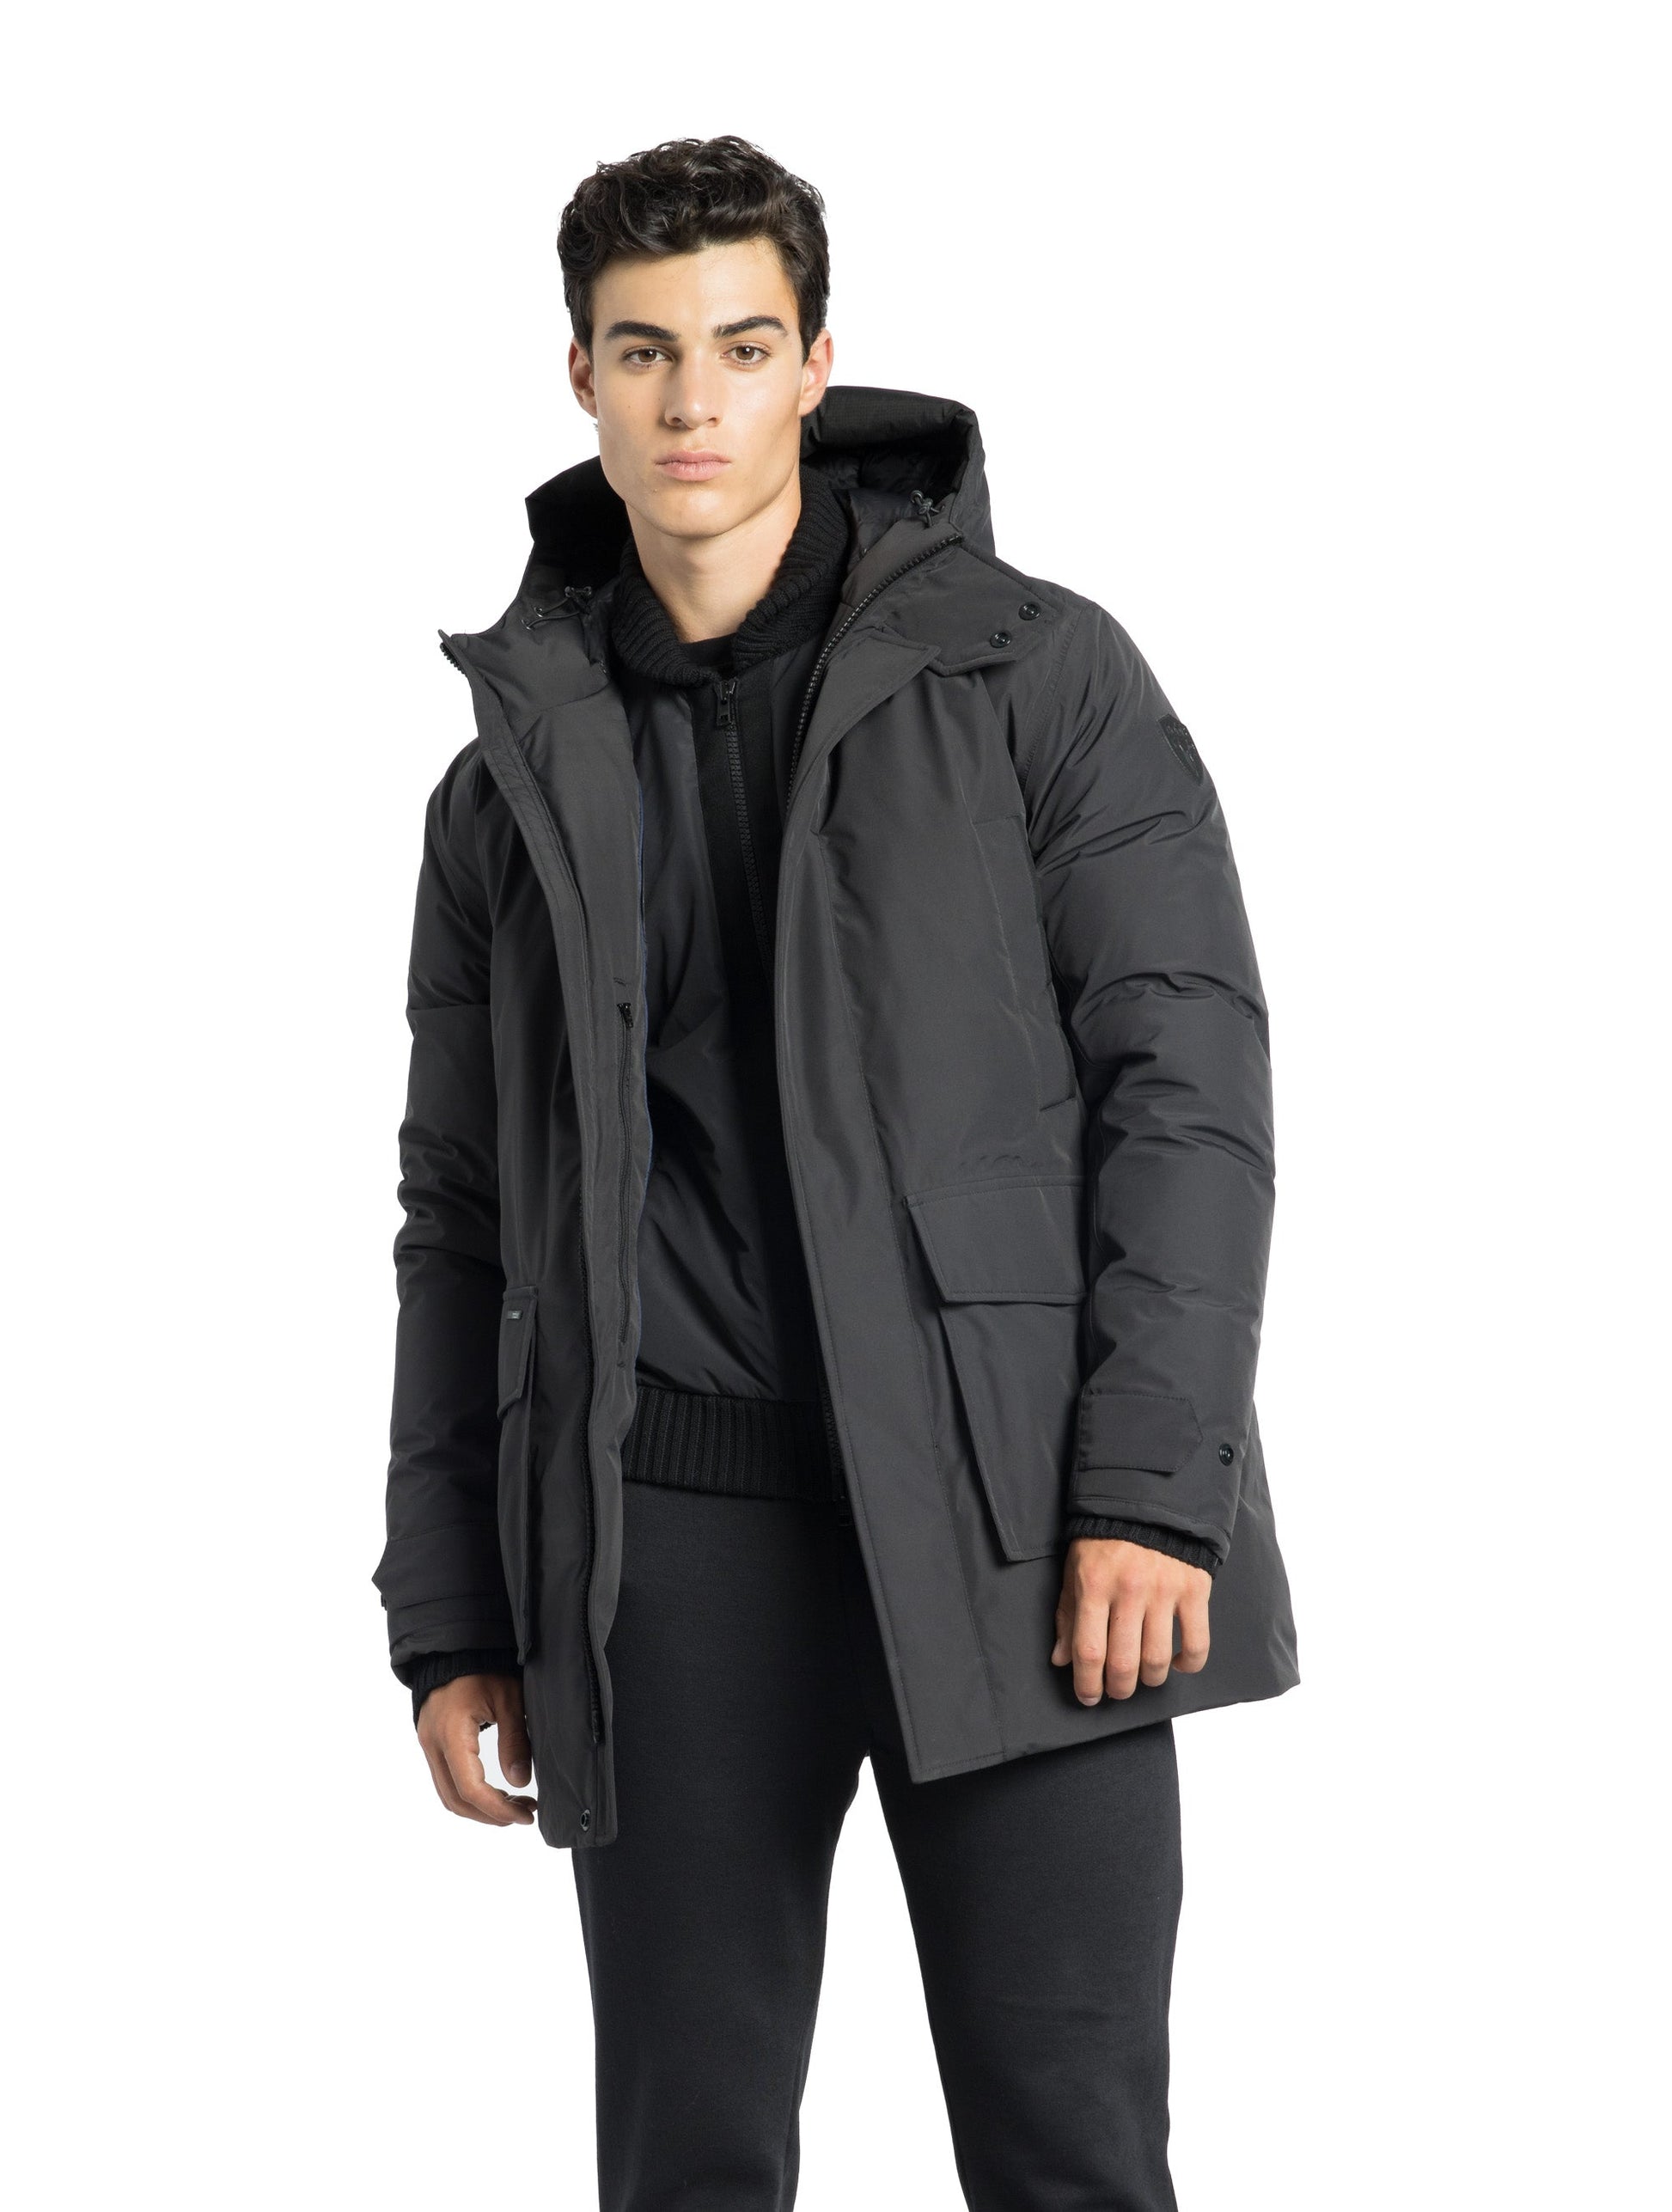 Kason Men's Light Down Parka in thigh length, premium 3-ply micro denier and stretch ripstop fabrication, Premium Canadian origin White Duck Down insulation, non-removable down-filled hood, two-way centre-front zipper, magnetic closure wind flap, fleece-lined pockets at chest and waist, flap pockets at waist, pit zipper vents, in Black